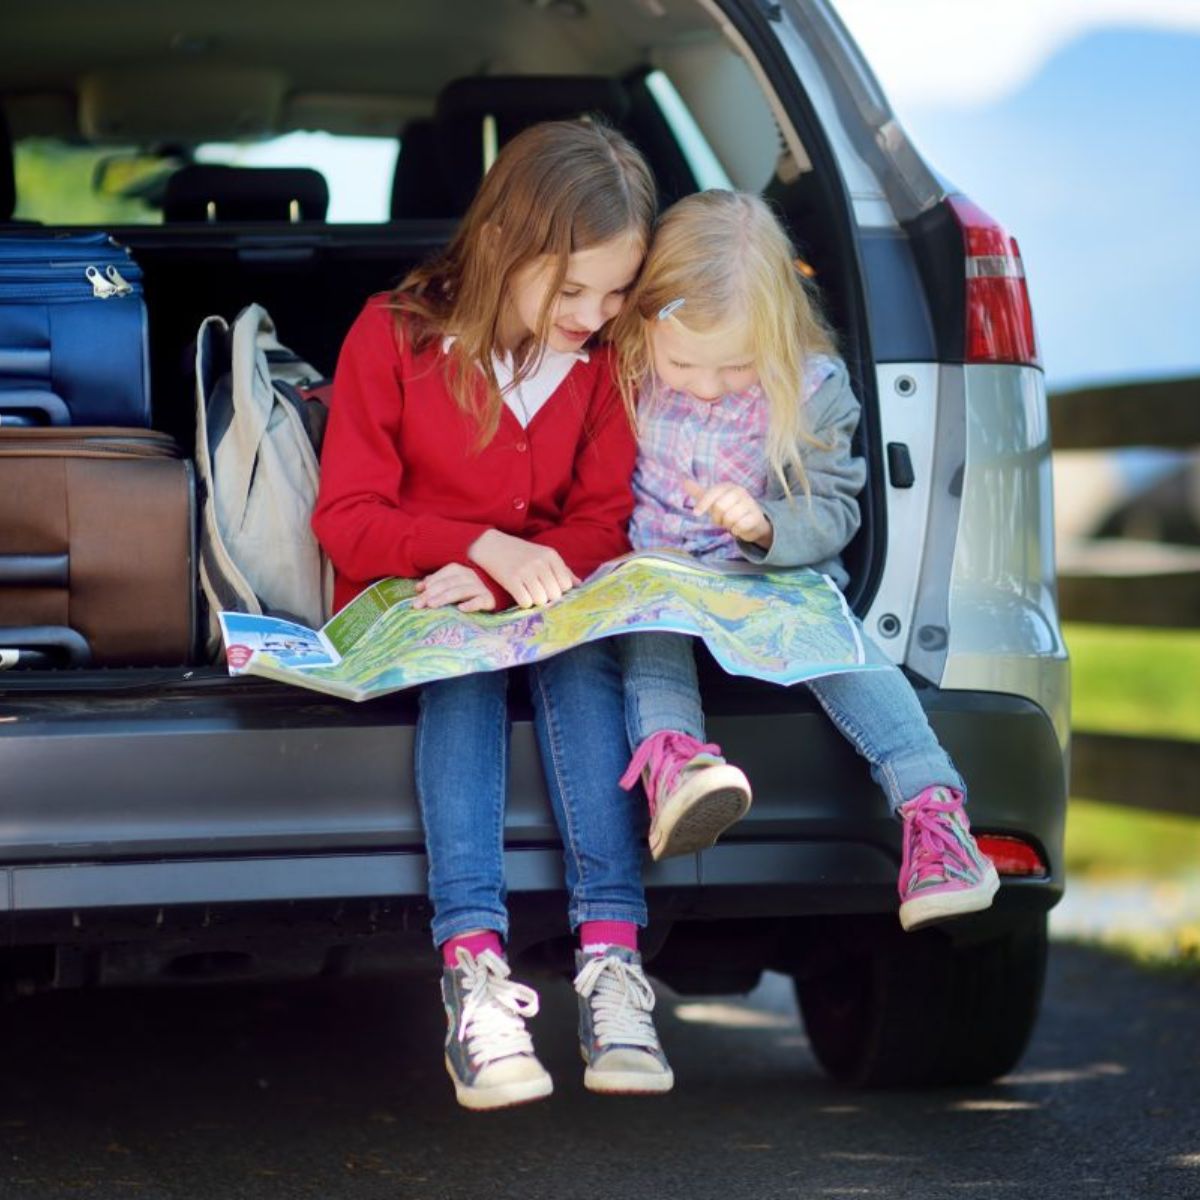 Two kids sitting at car trunk and reading a map.